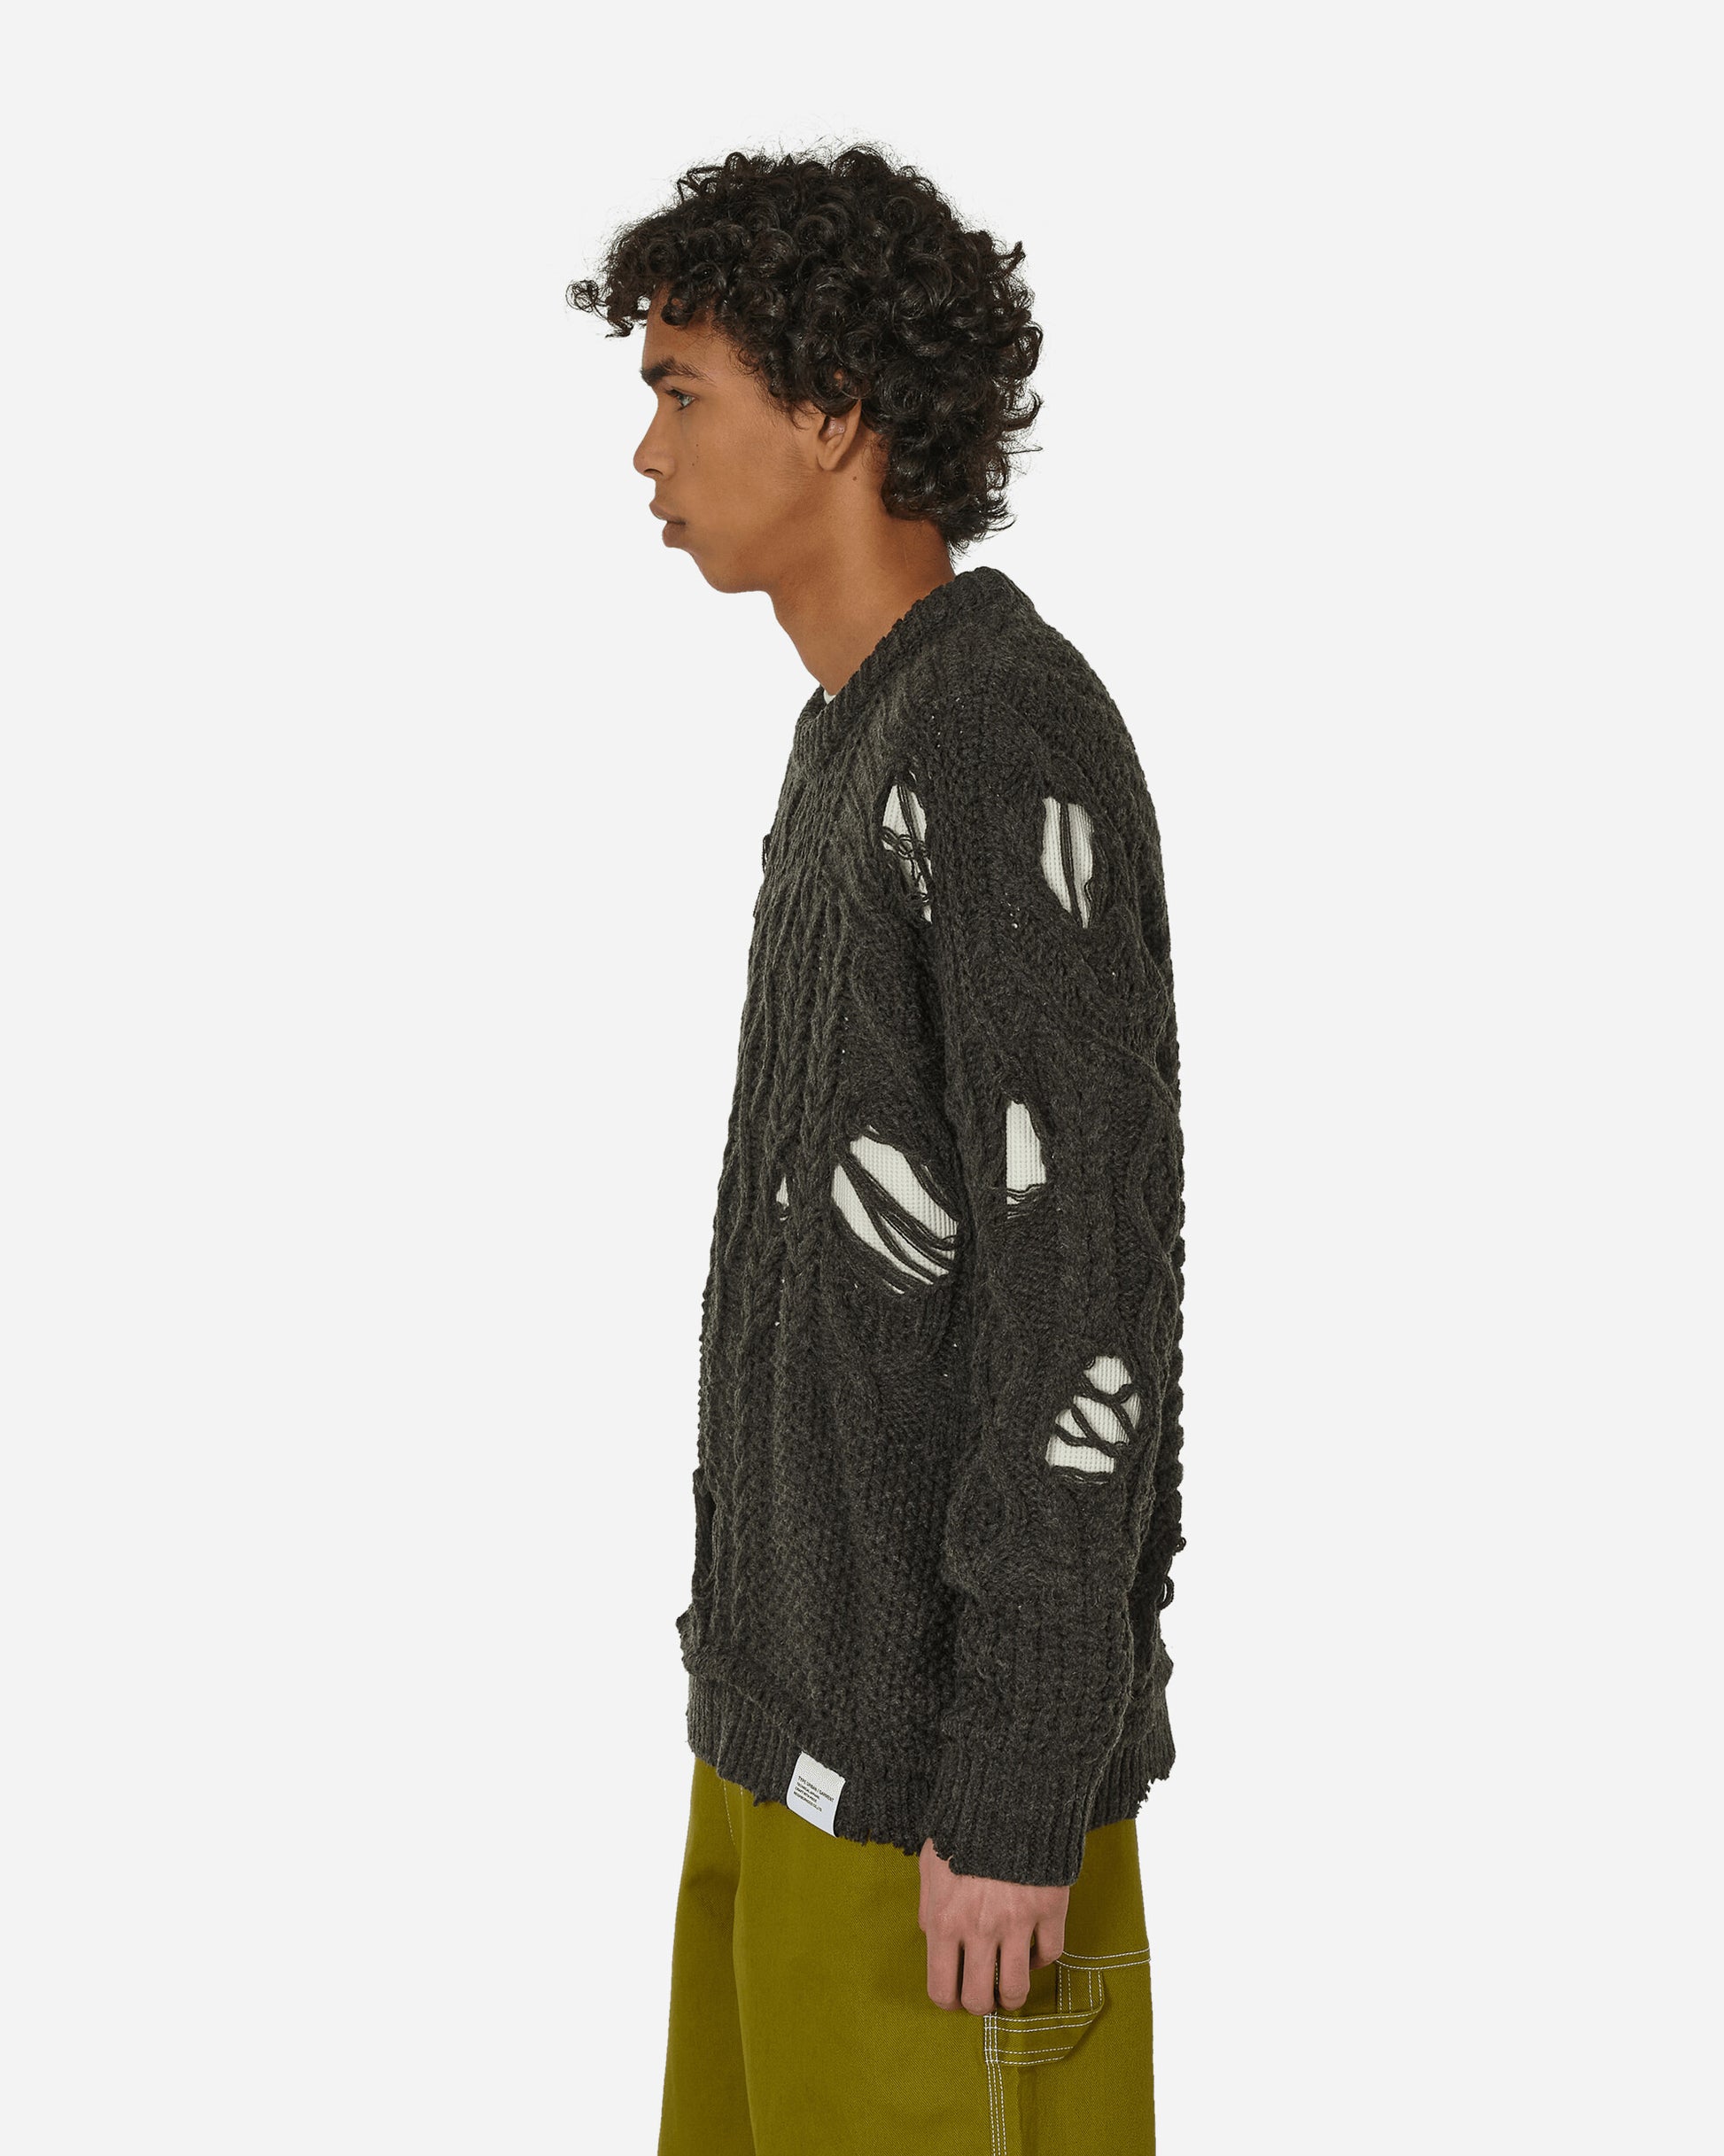 Neighborhood Patchwork Savage Sweater Charcoal Knitwears Sweaters 232FUNH-KNM01 CH